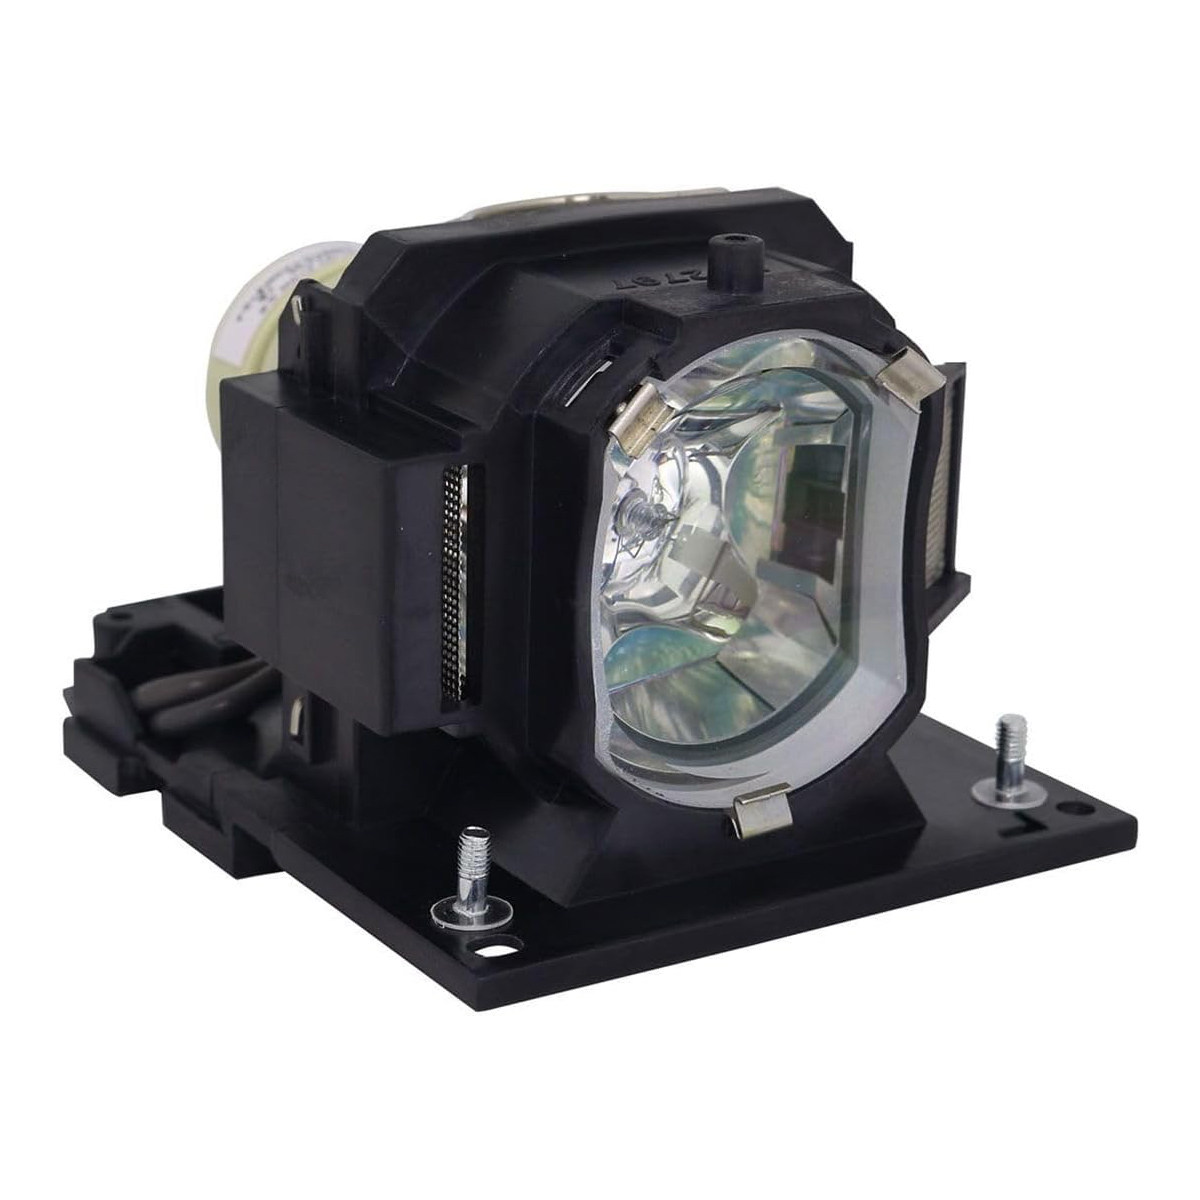 Replacement Projector lamp DT01181 For Hitachi BZ-1 BZ-1M CP-A220N CP-A221N